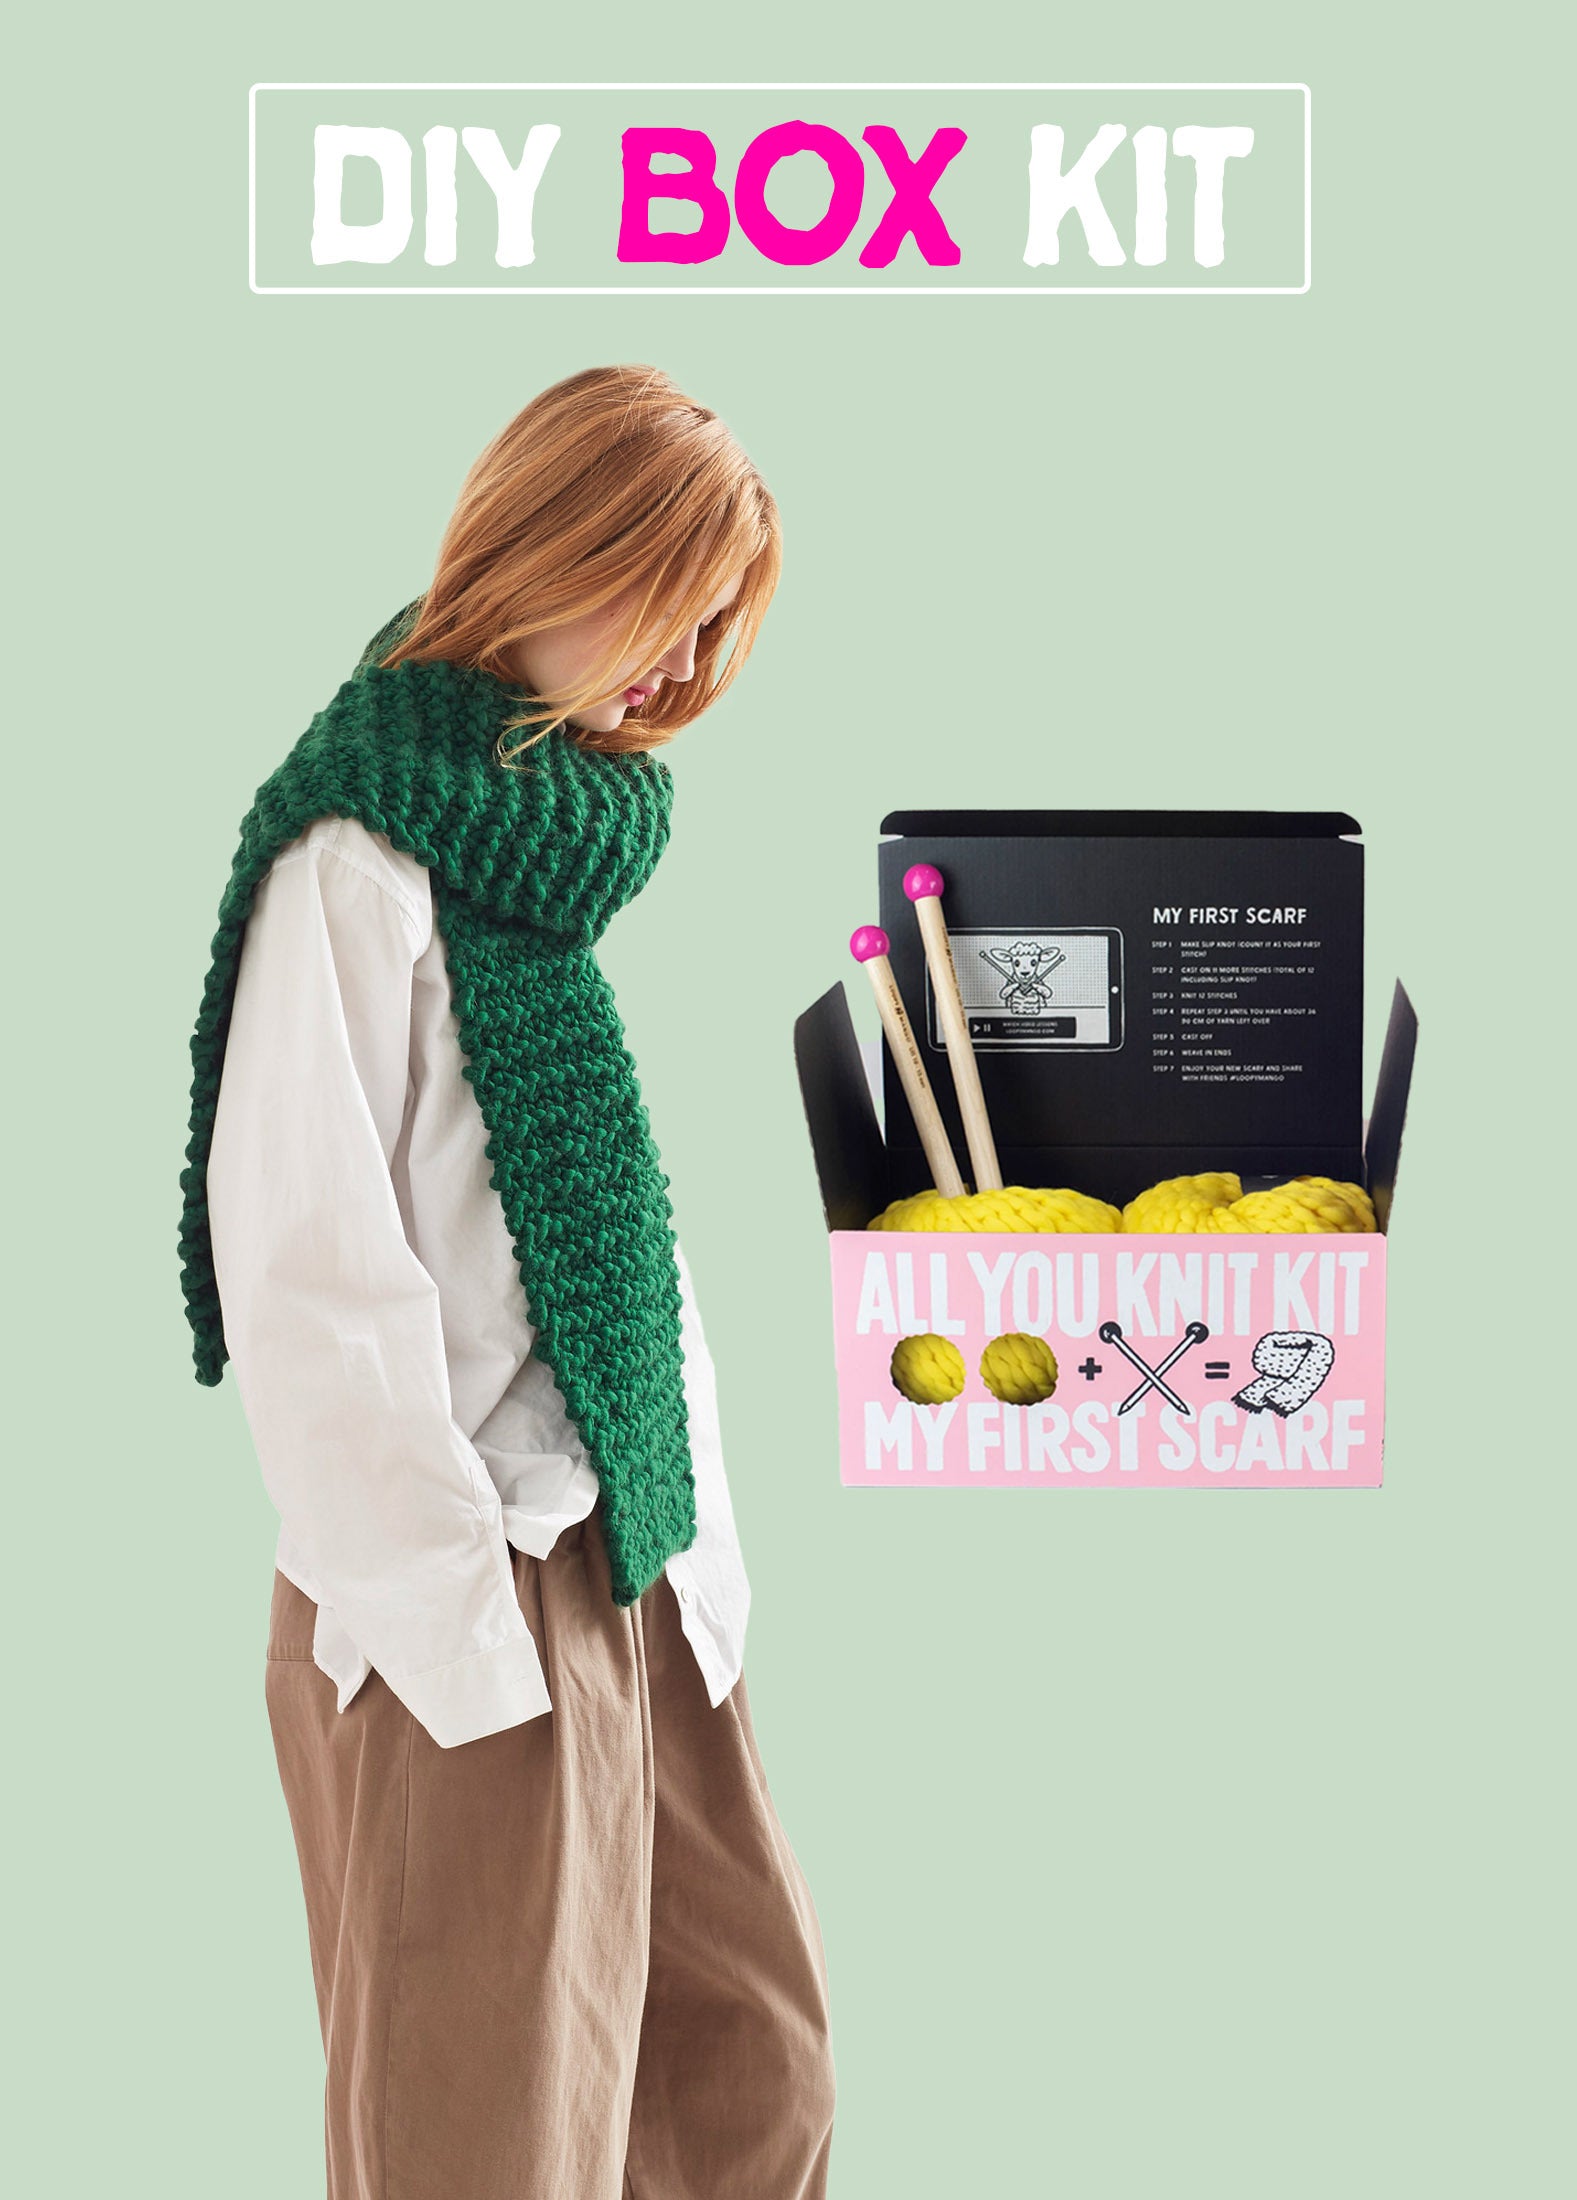 NGHTMRKT Scarf Knitting Kit for Beginners Adults - Learn to Knit with this  Starter Knitting Kit including Yarn and Needles. Our Complete Beginners